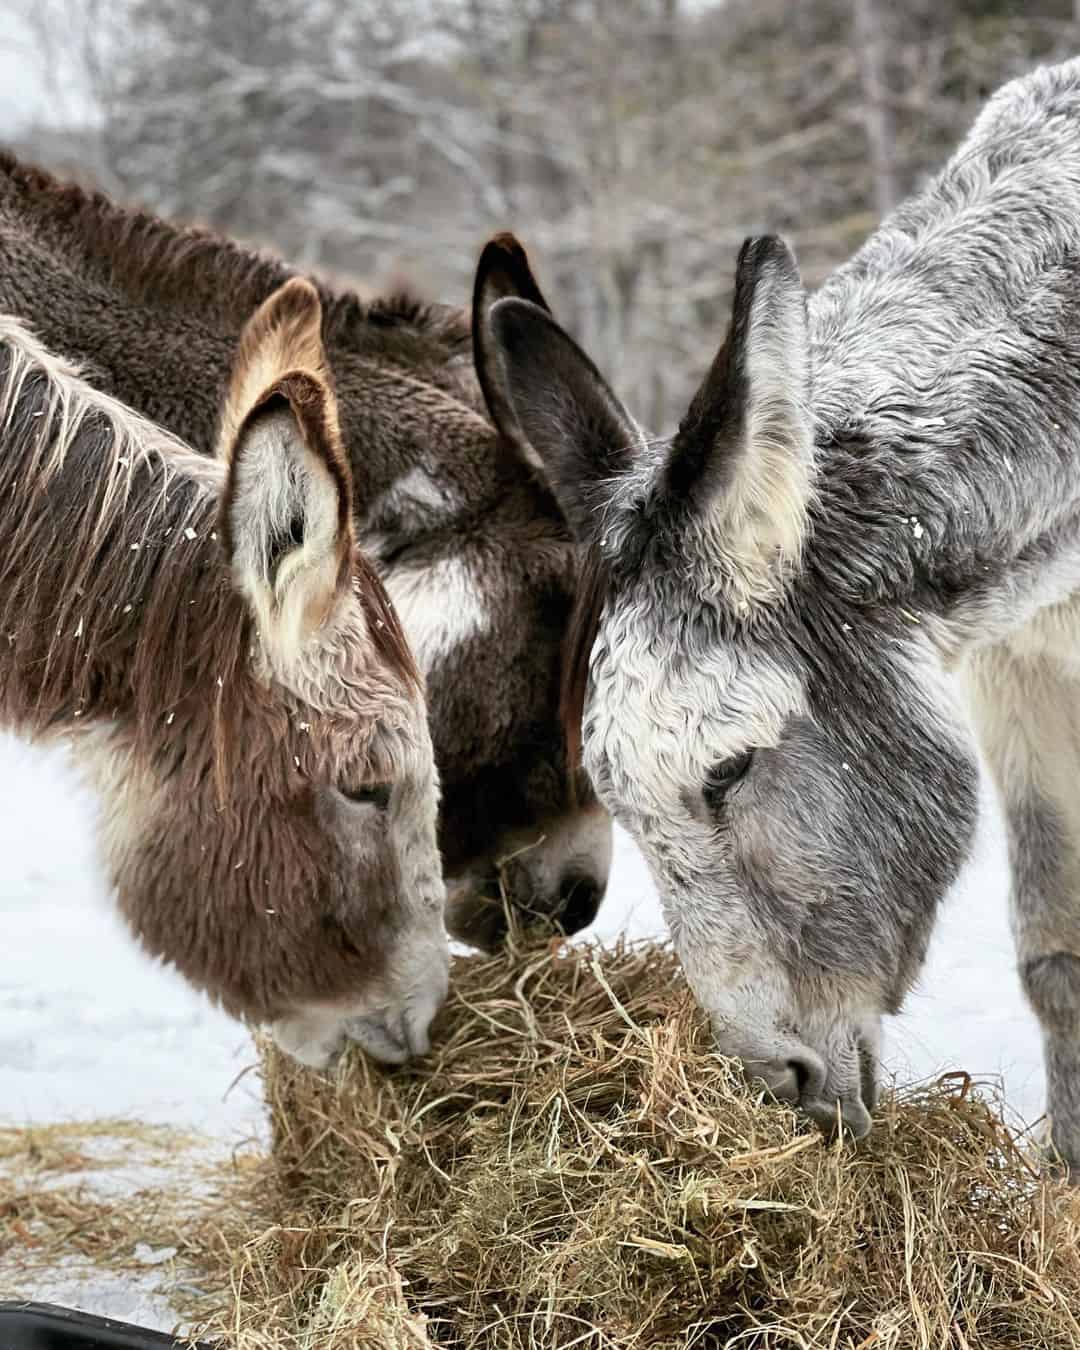 Donkeys and Mules are different